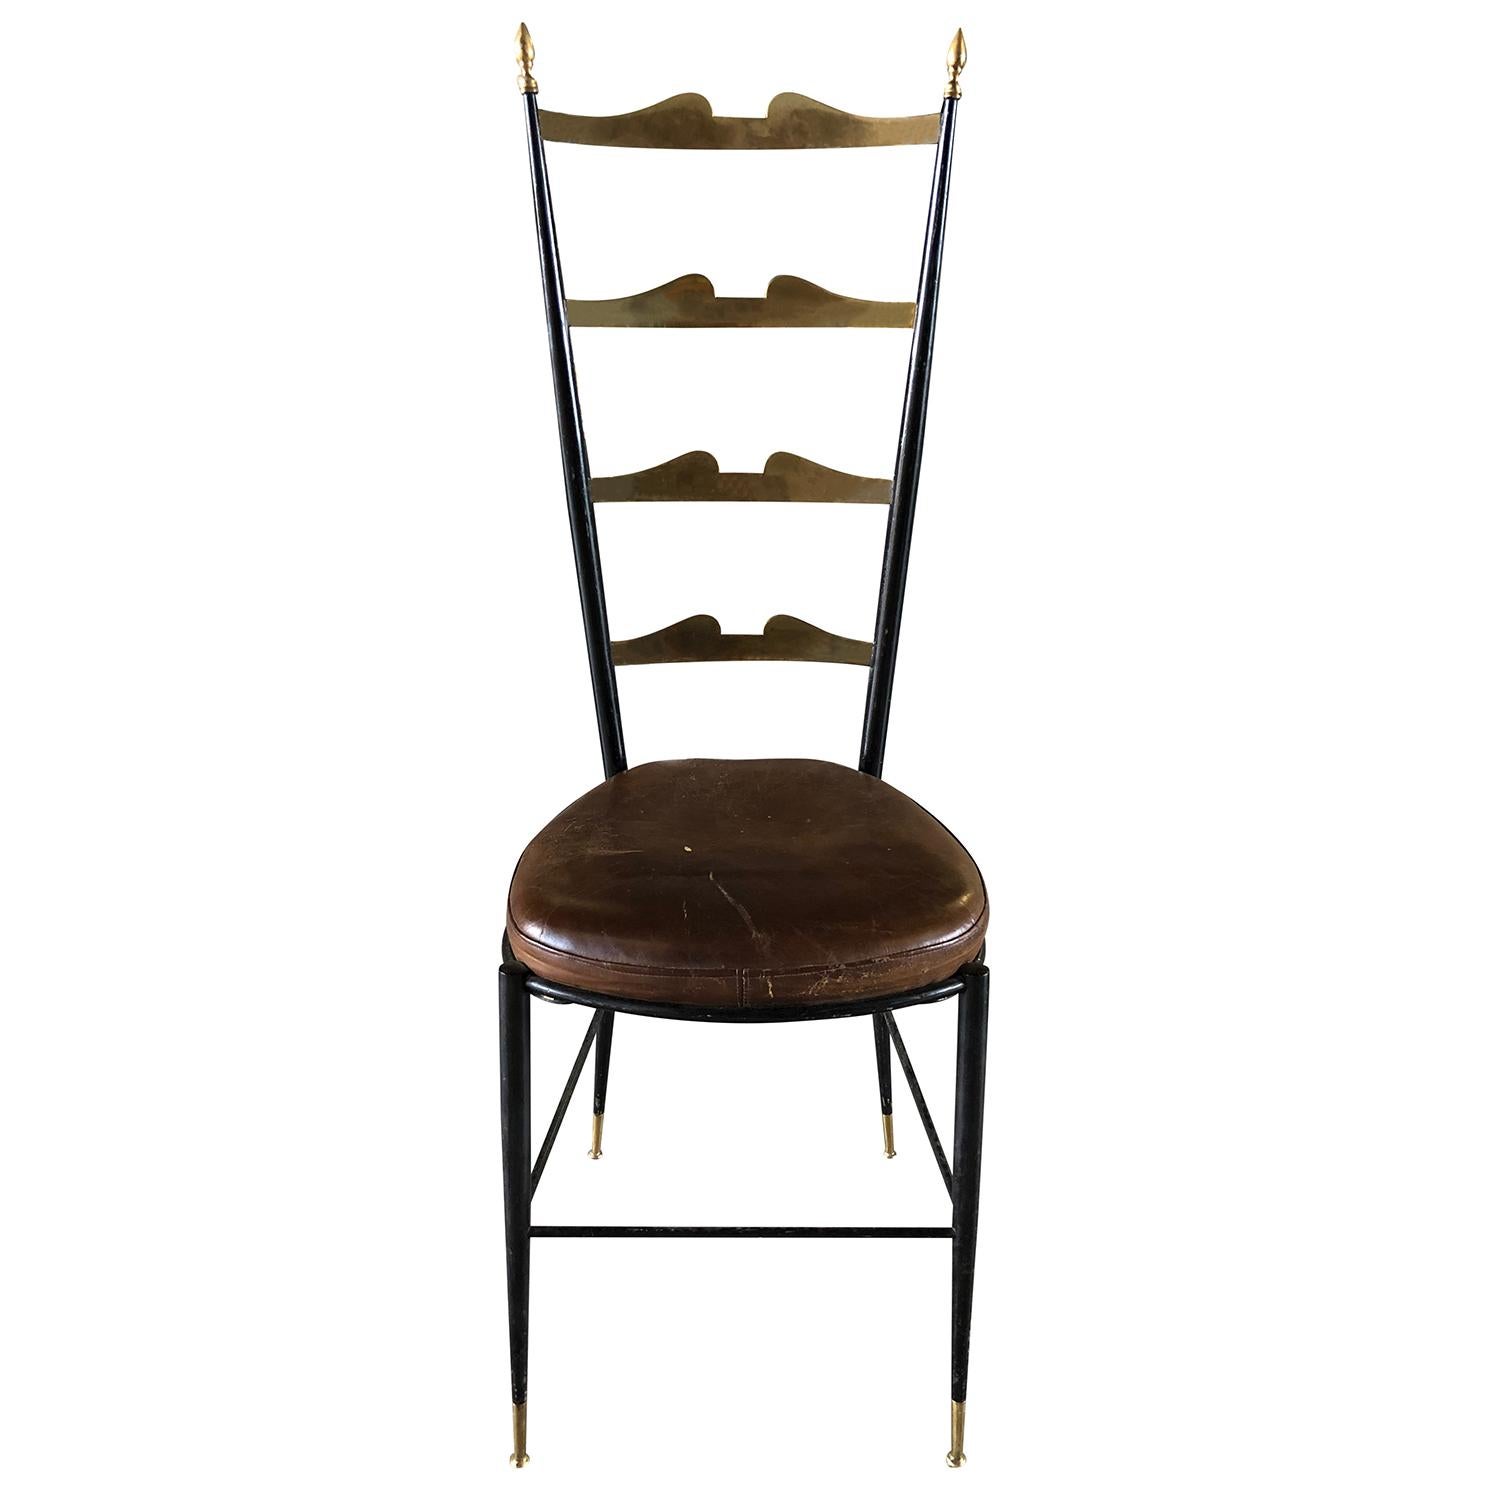 Pair of Paolo Buffa high back side chairs designed for Marelli and Collico, Italy with metal frame brass backrest and brass feet. Very sculptural design. Wear consistent with age and use, circa 1950, Italy.

Measures: Seat height 21?

Seat depth